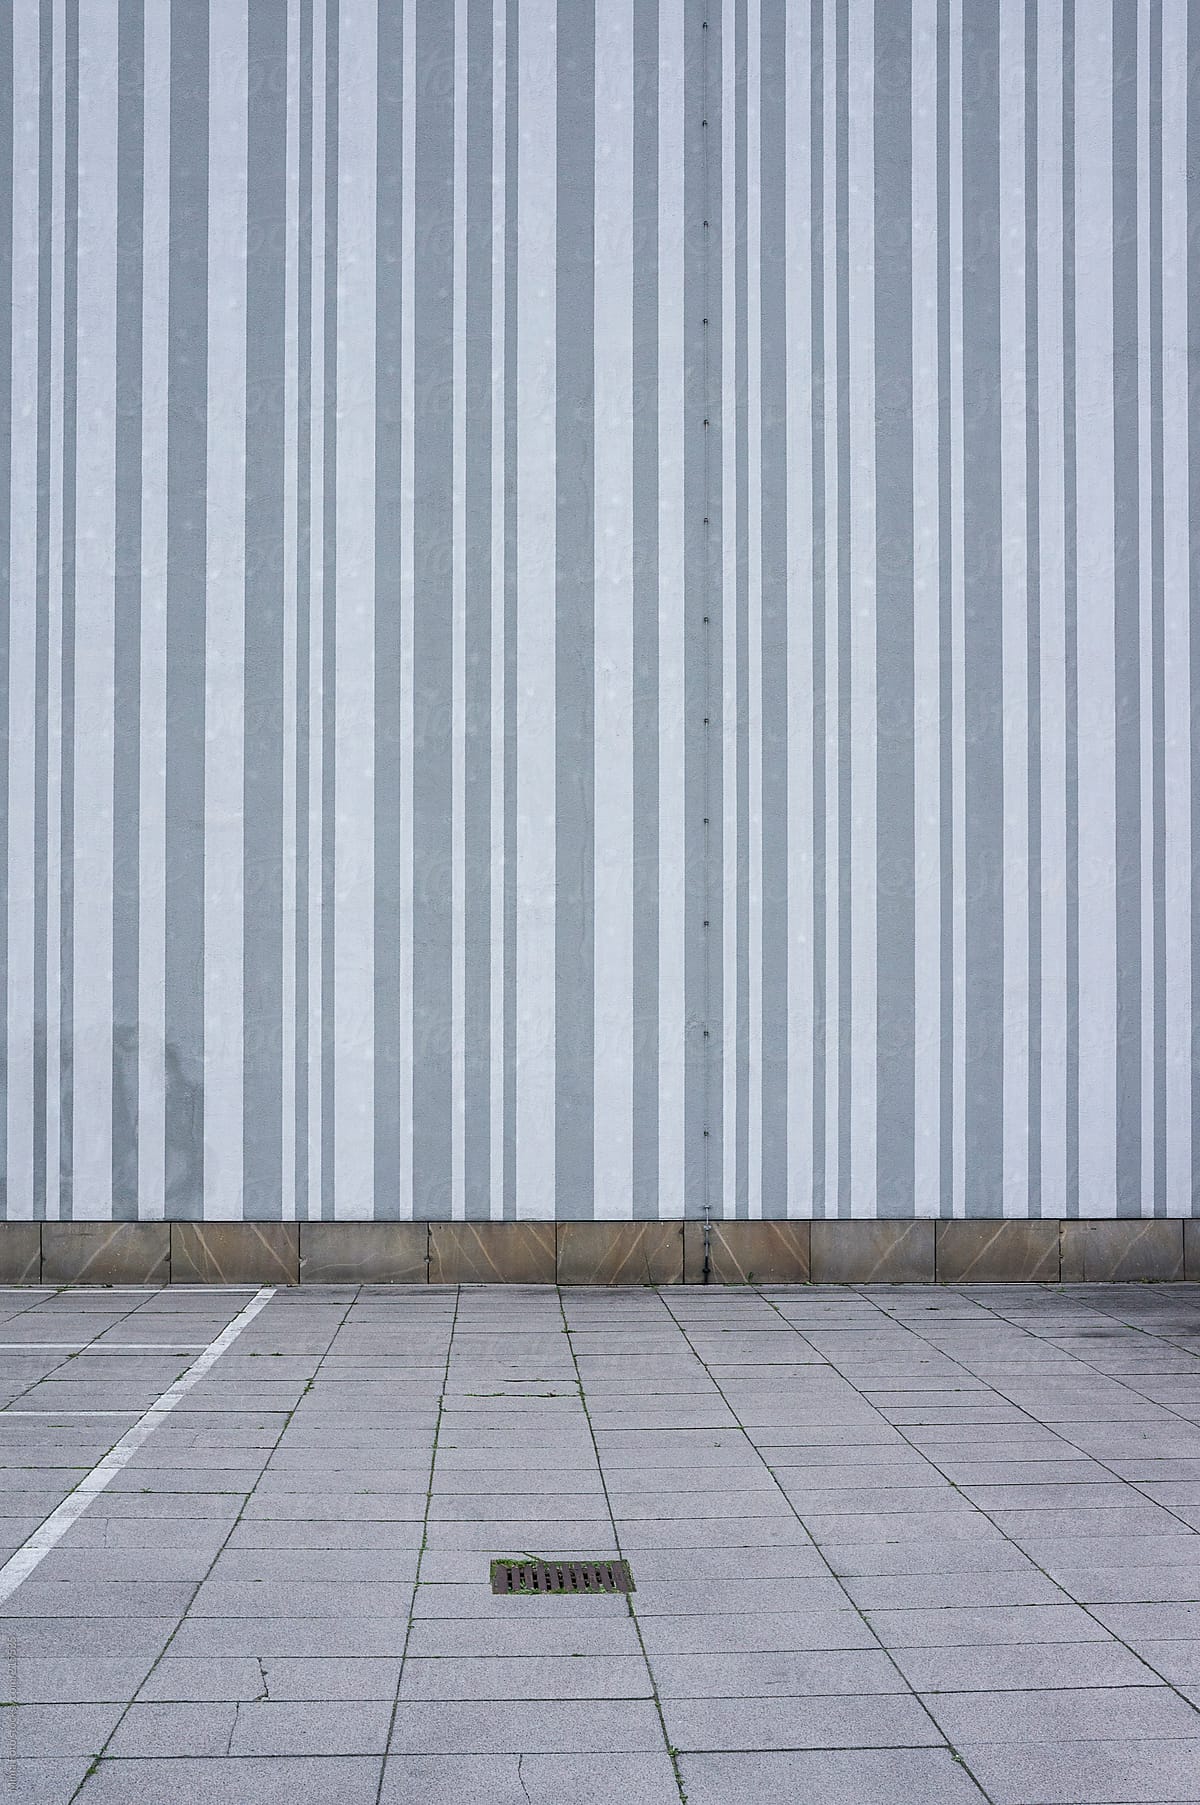 Striped wall and parking lot